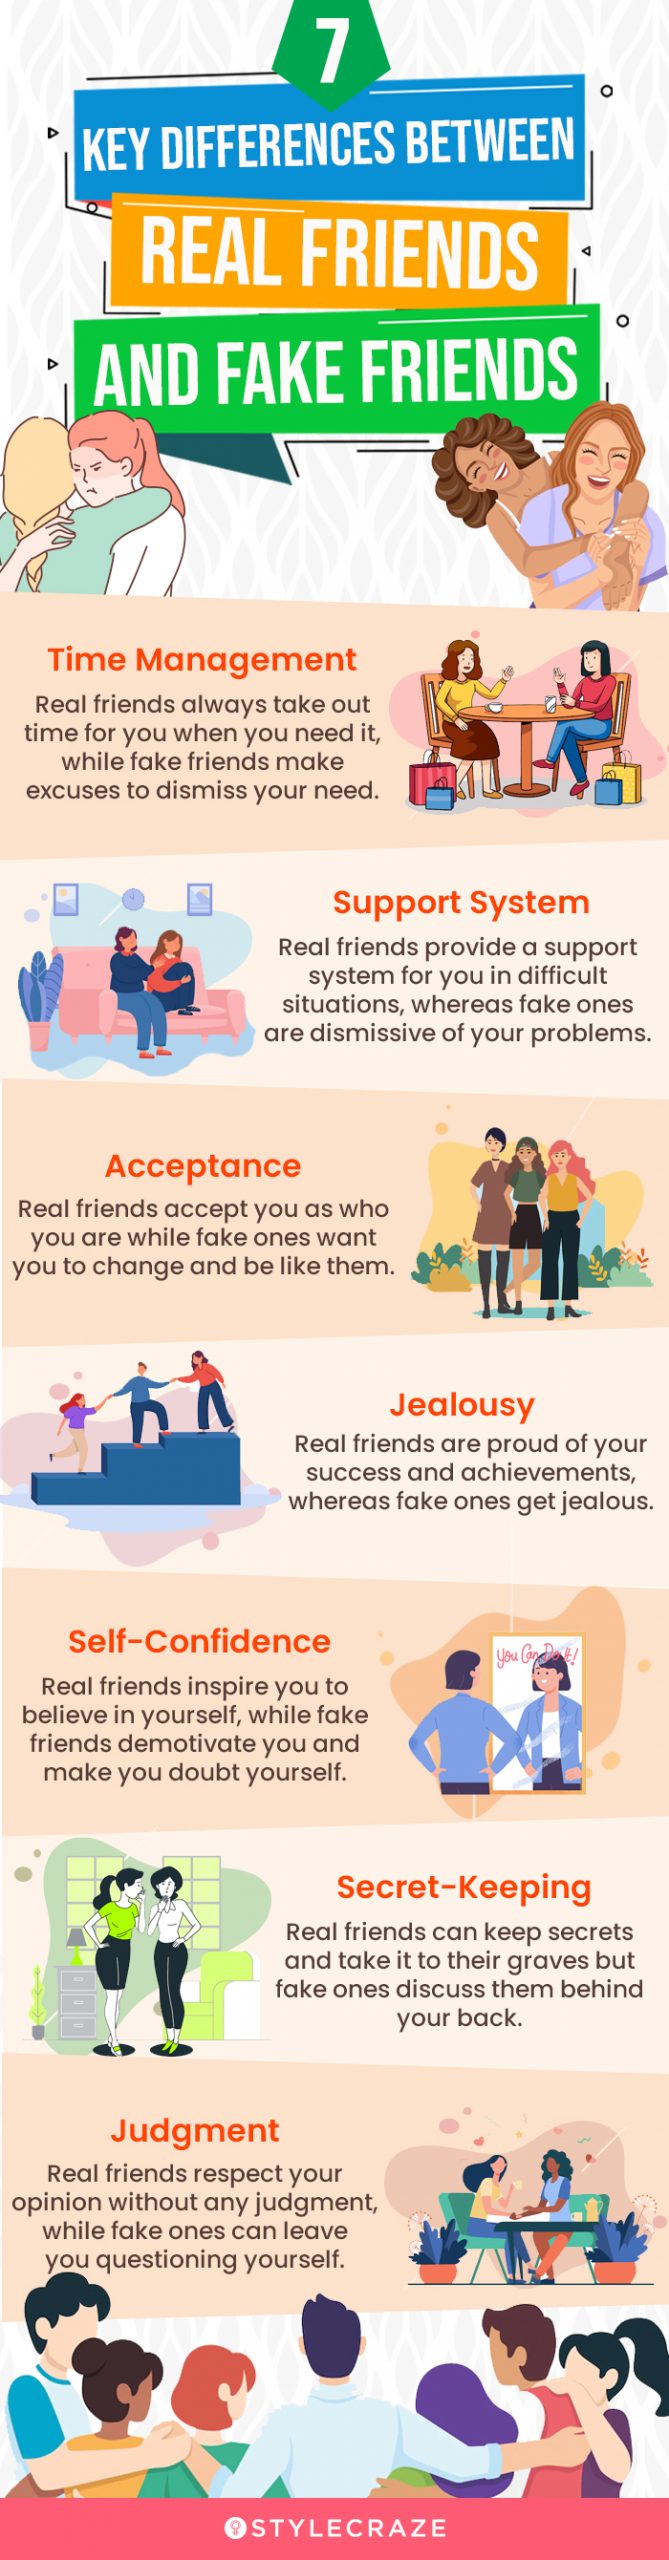 7 key differences between real friends and fake friends (infographic)